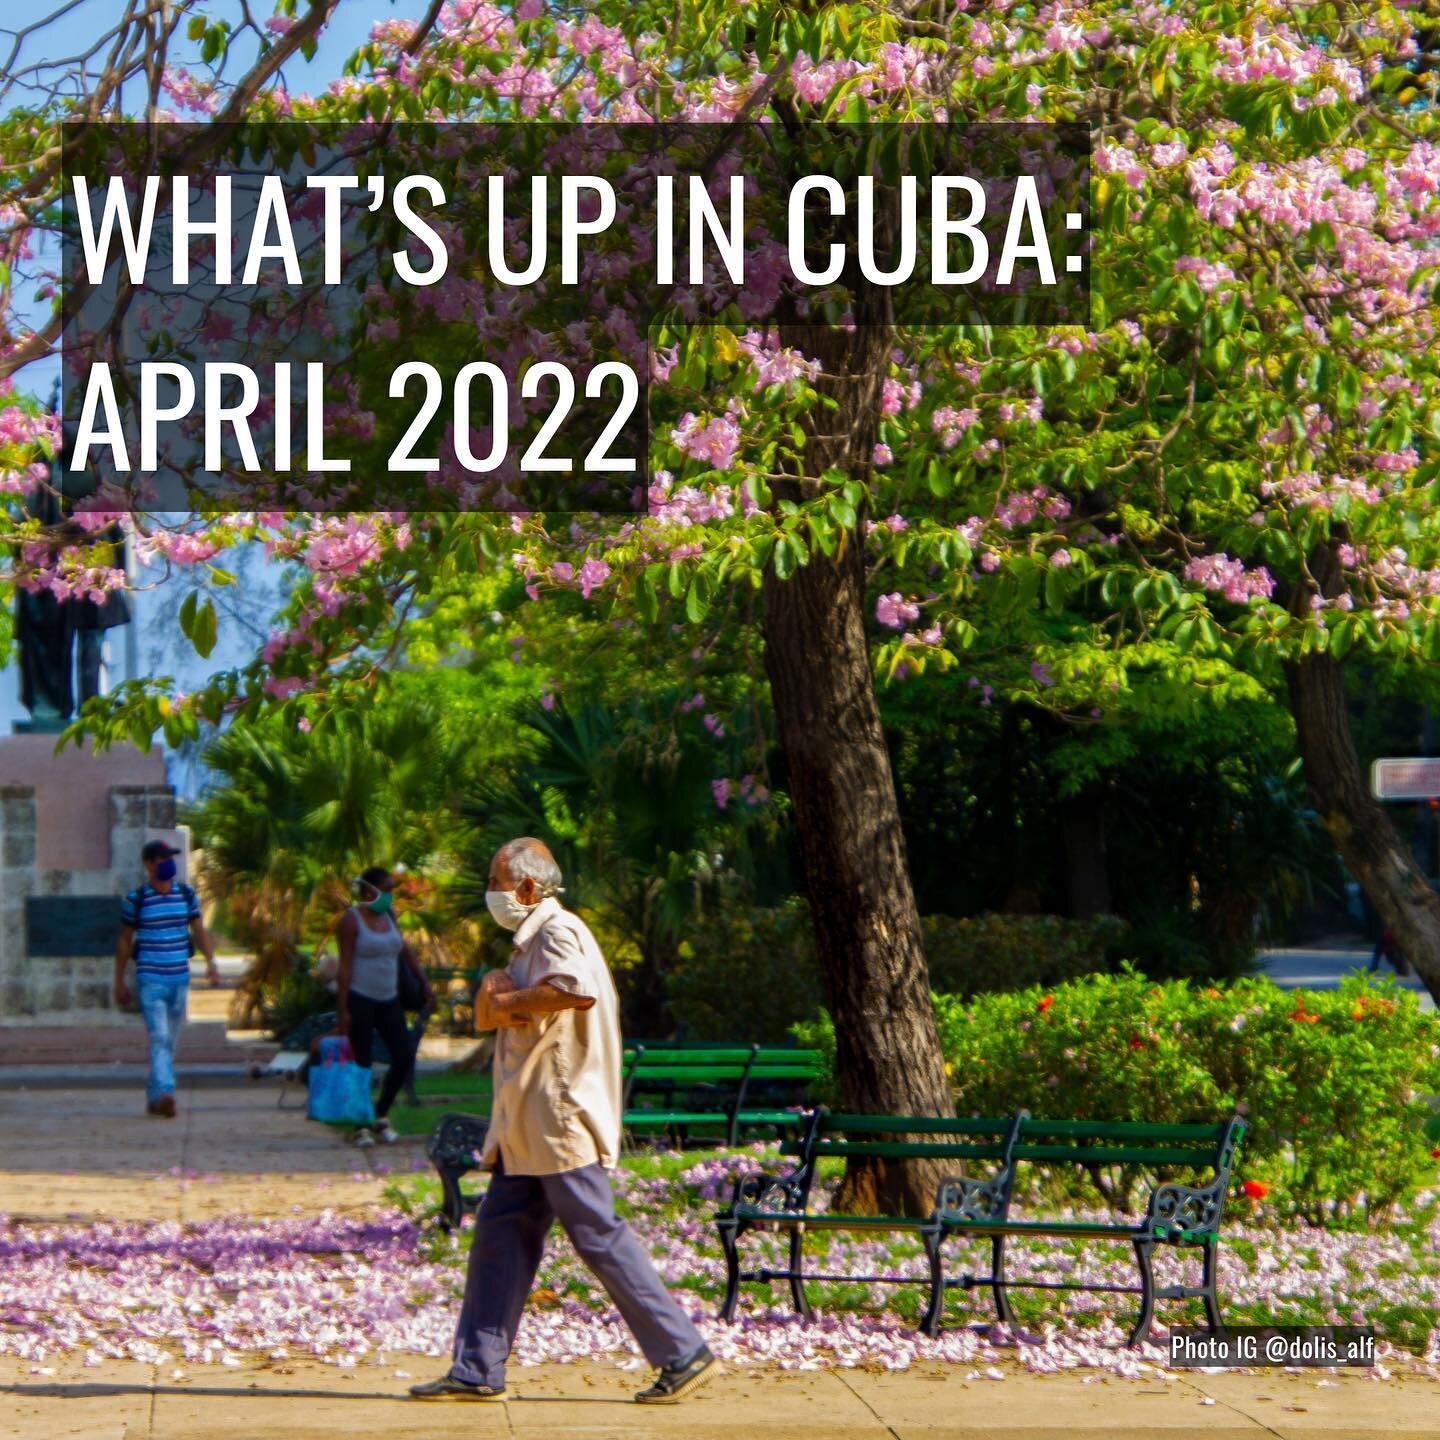 As April, the month of the flower, comes to a close, we came up with our shortlist of this past month's important events, popular news and music, as well as a MUST follow IG account @mentoras_creativas from Cuba. Check out our short summary and stay 